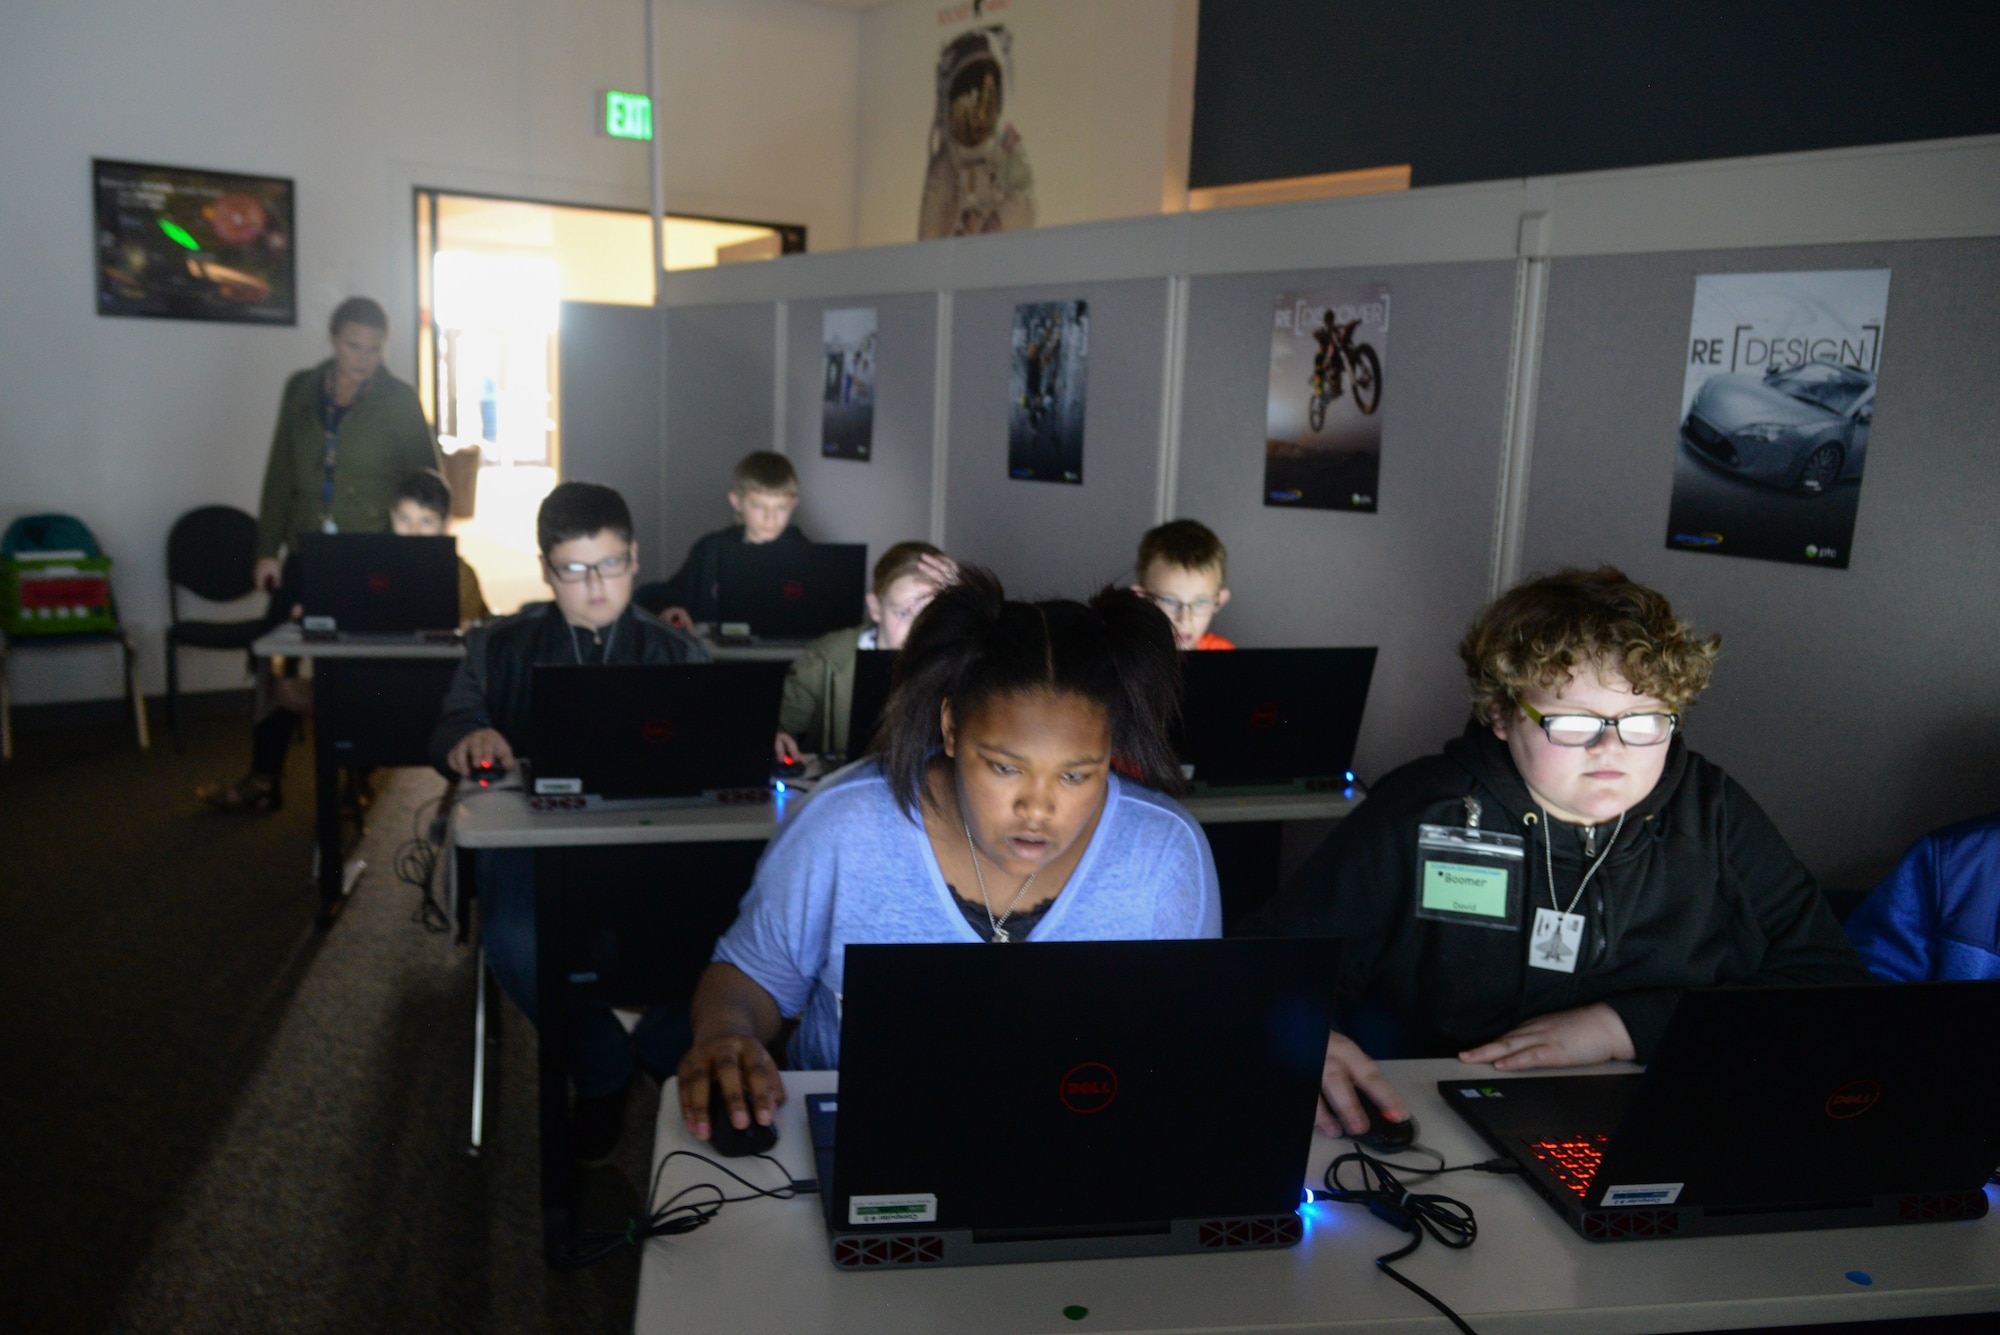 Sixth graders from King Elementary in Layton, Utah, learn computer-aided design during Starbase at Hill Air Force Base March 14, 2018. Starbase is a nationwide program that aims to introduce elementary school students to science, technology, engineering and math and is funded entirely by the Department of Defense. (U.S. Air Force photo by Cynthia Griggs)